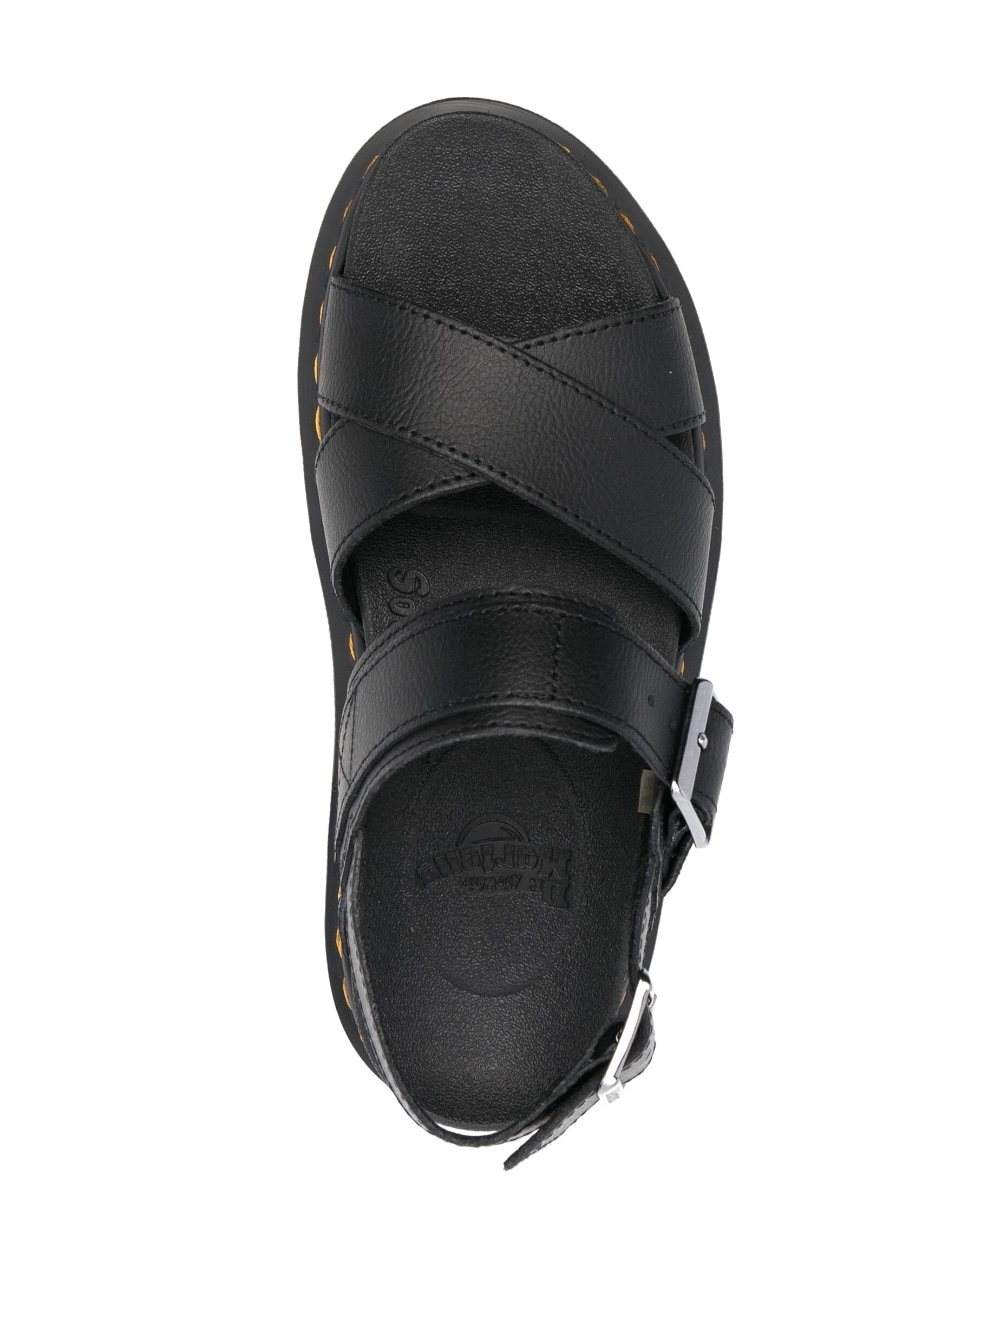 Voss II Athena leather sandals - 4